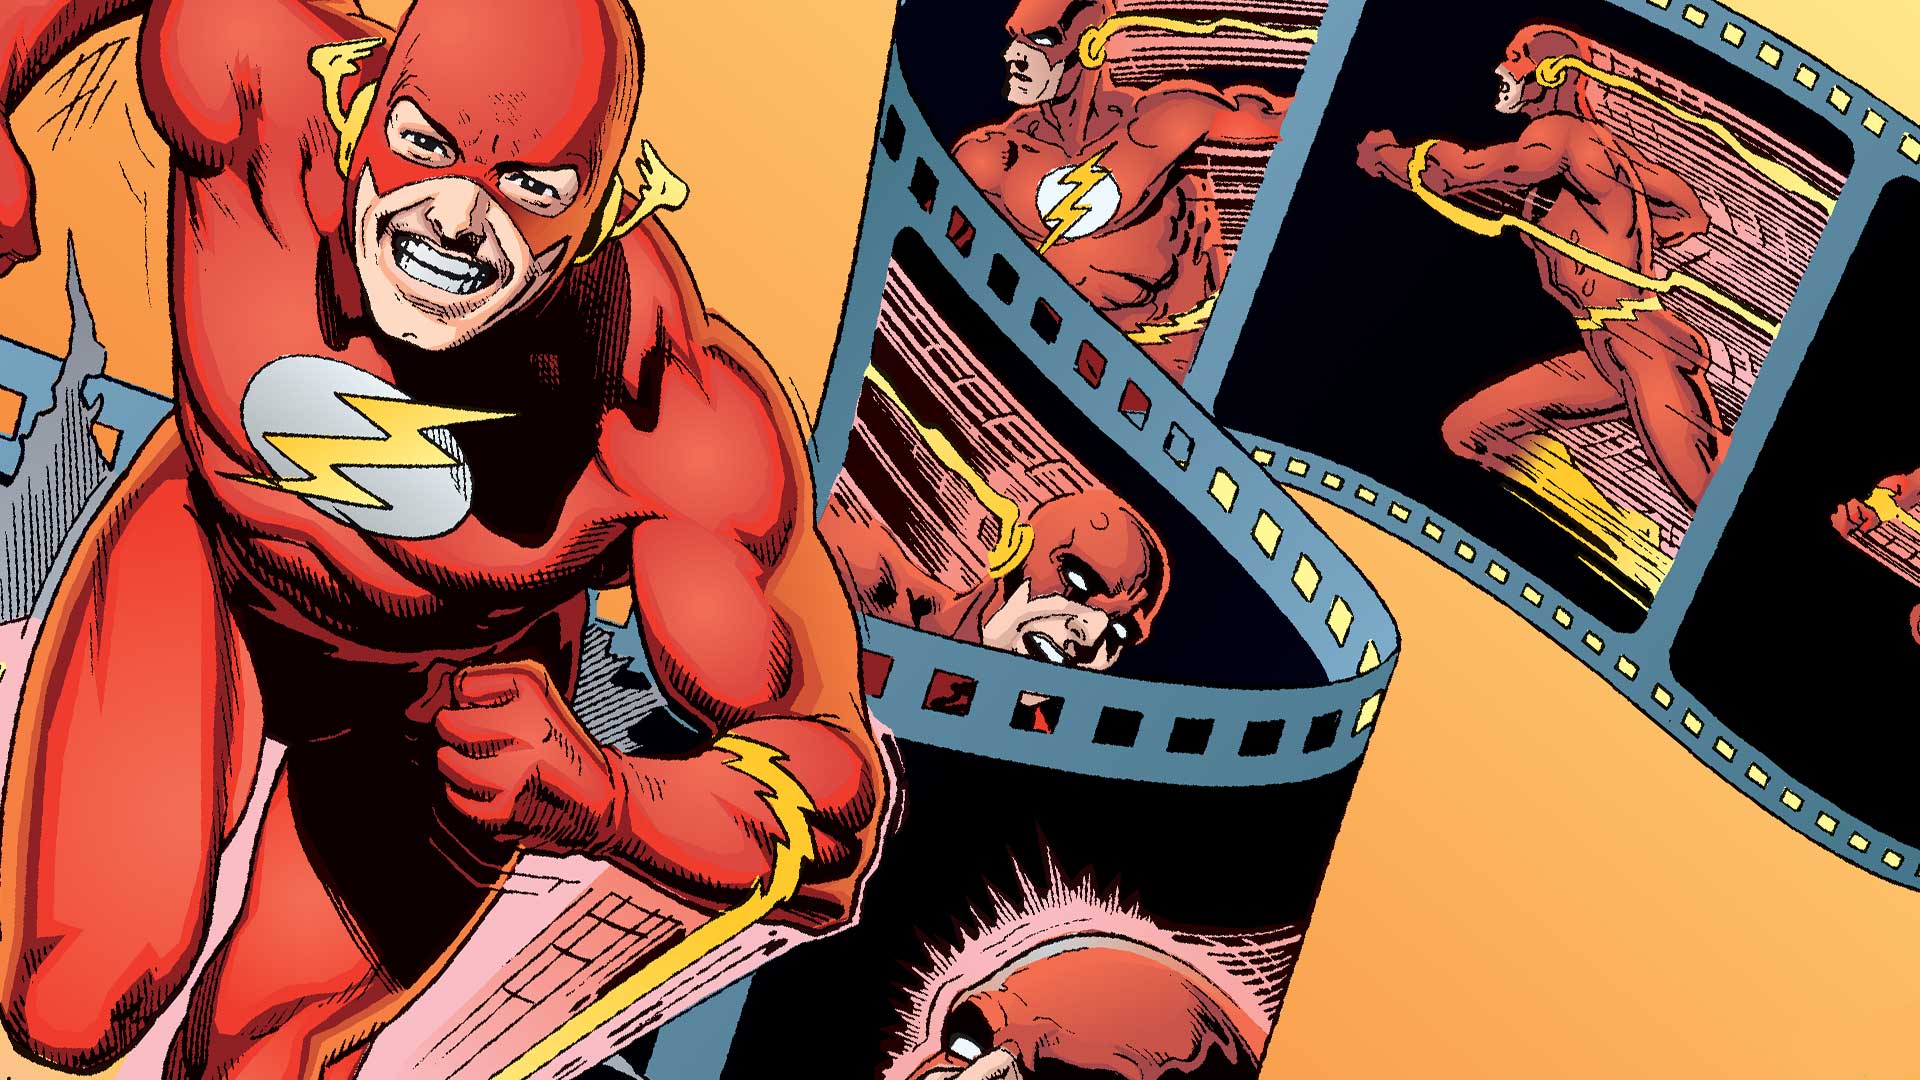 Five characters rumored to appear in The Flash movie!